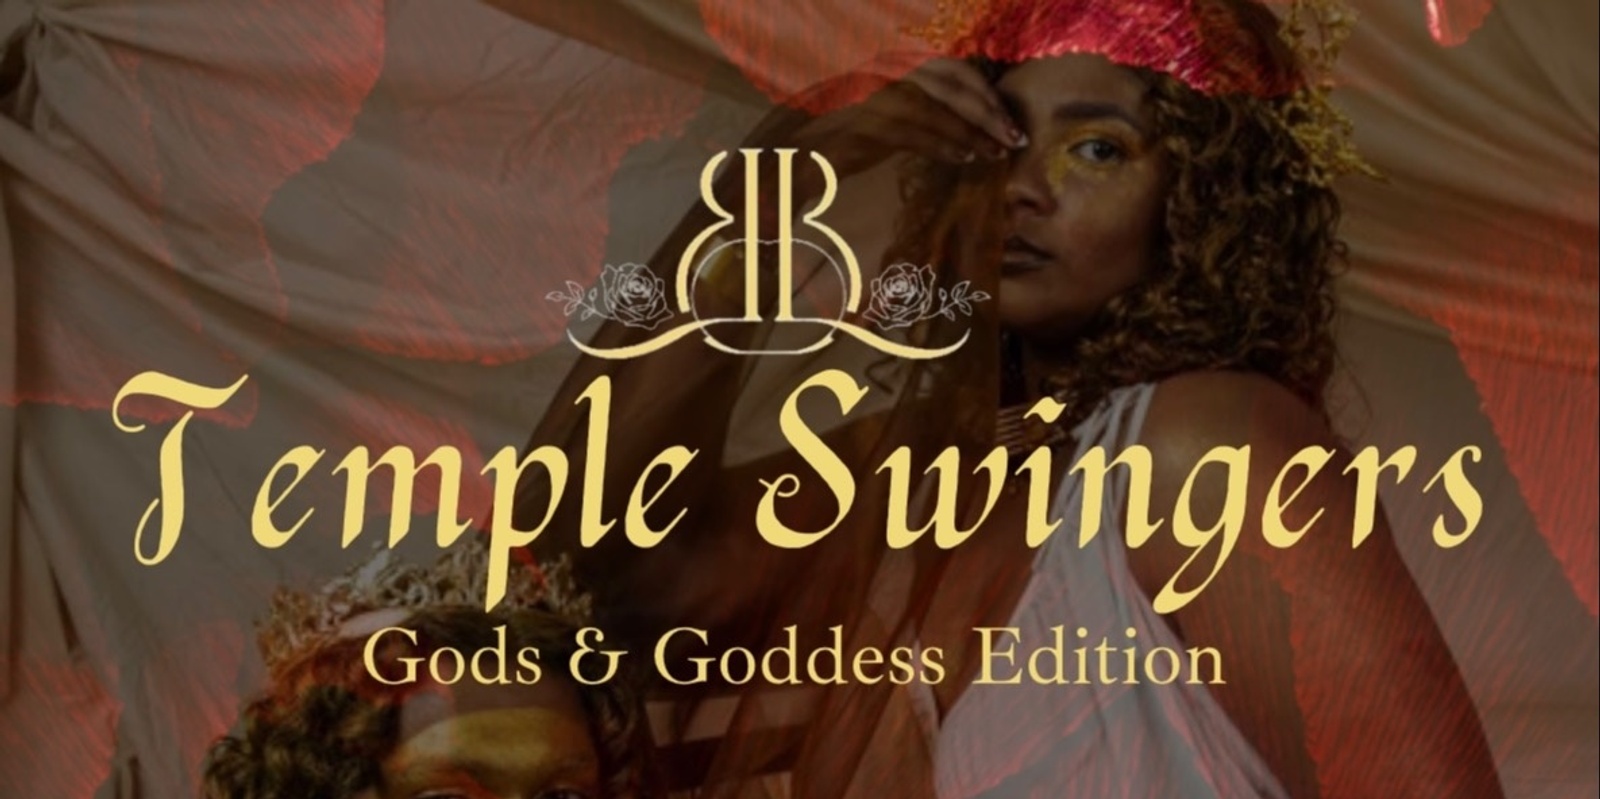 Banner image for Temple Swingers